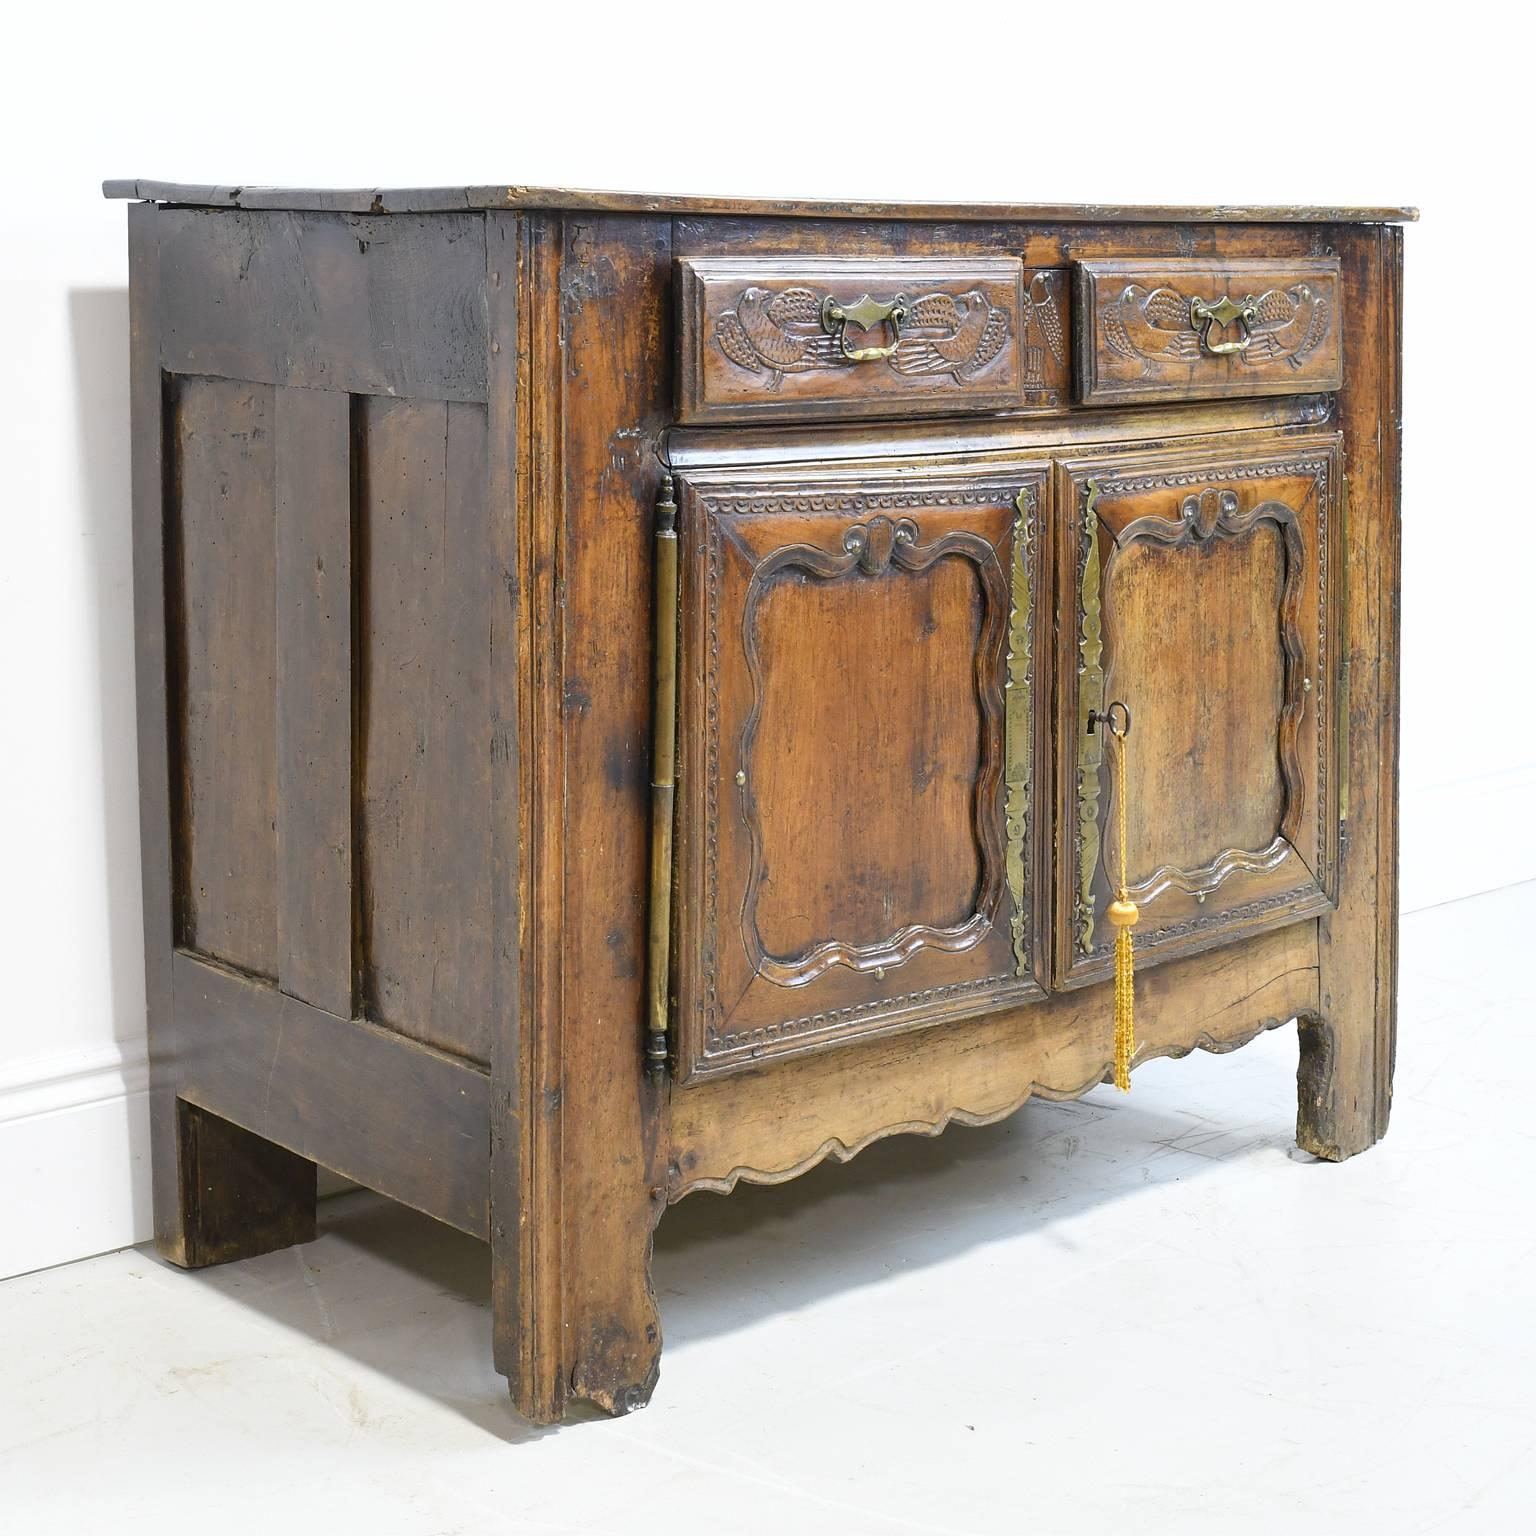 A mid-18th century buffet or sideboard in walnut with two cabinet doors with curvilinear, recessed panels below two drawers with carved depictions of birds. Has original brass key-plates and hinges, with one working key, France, circa 1750.
Makes a